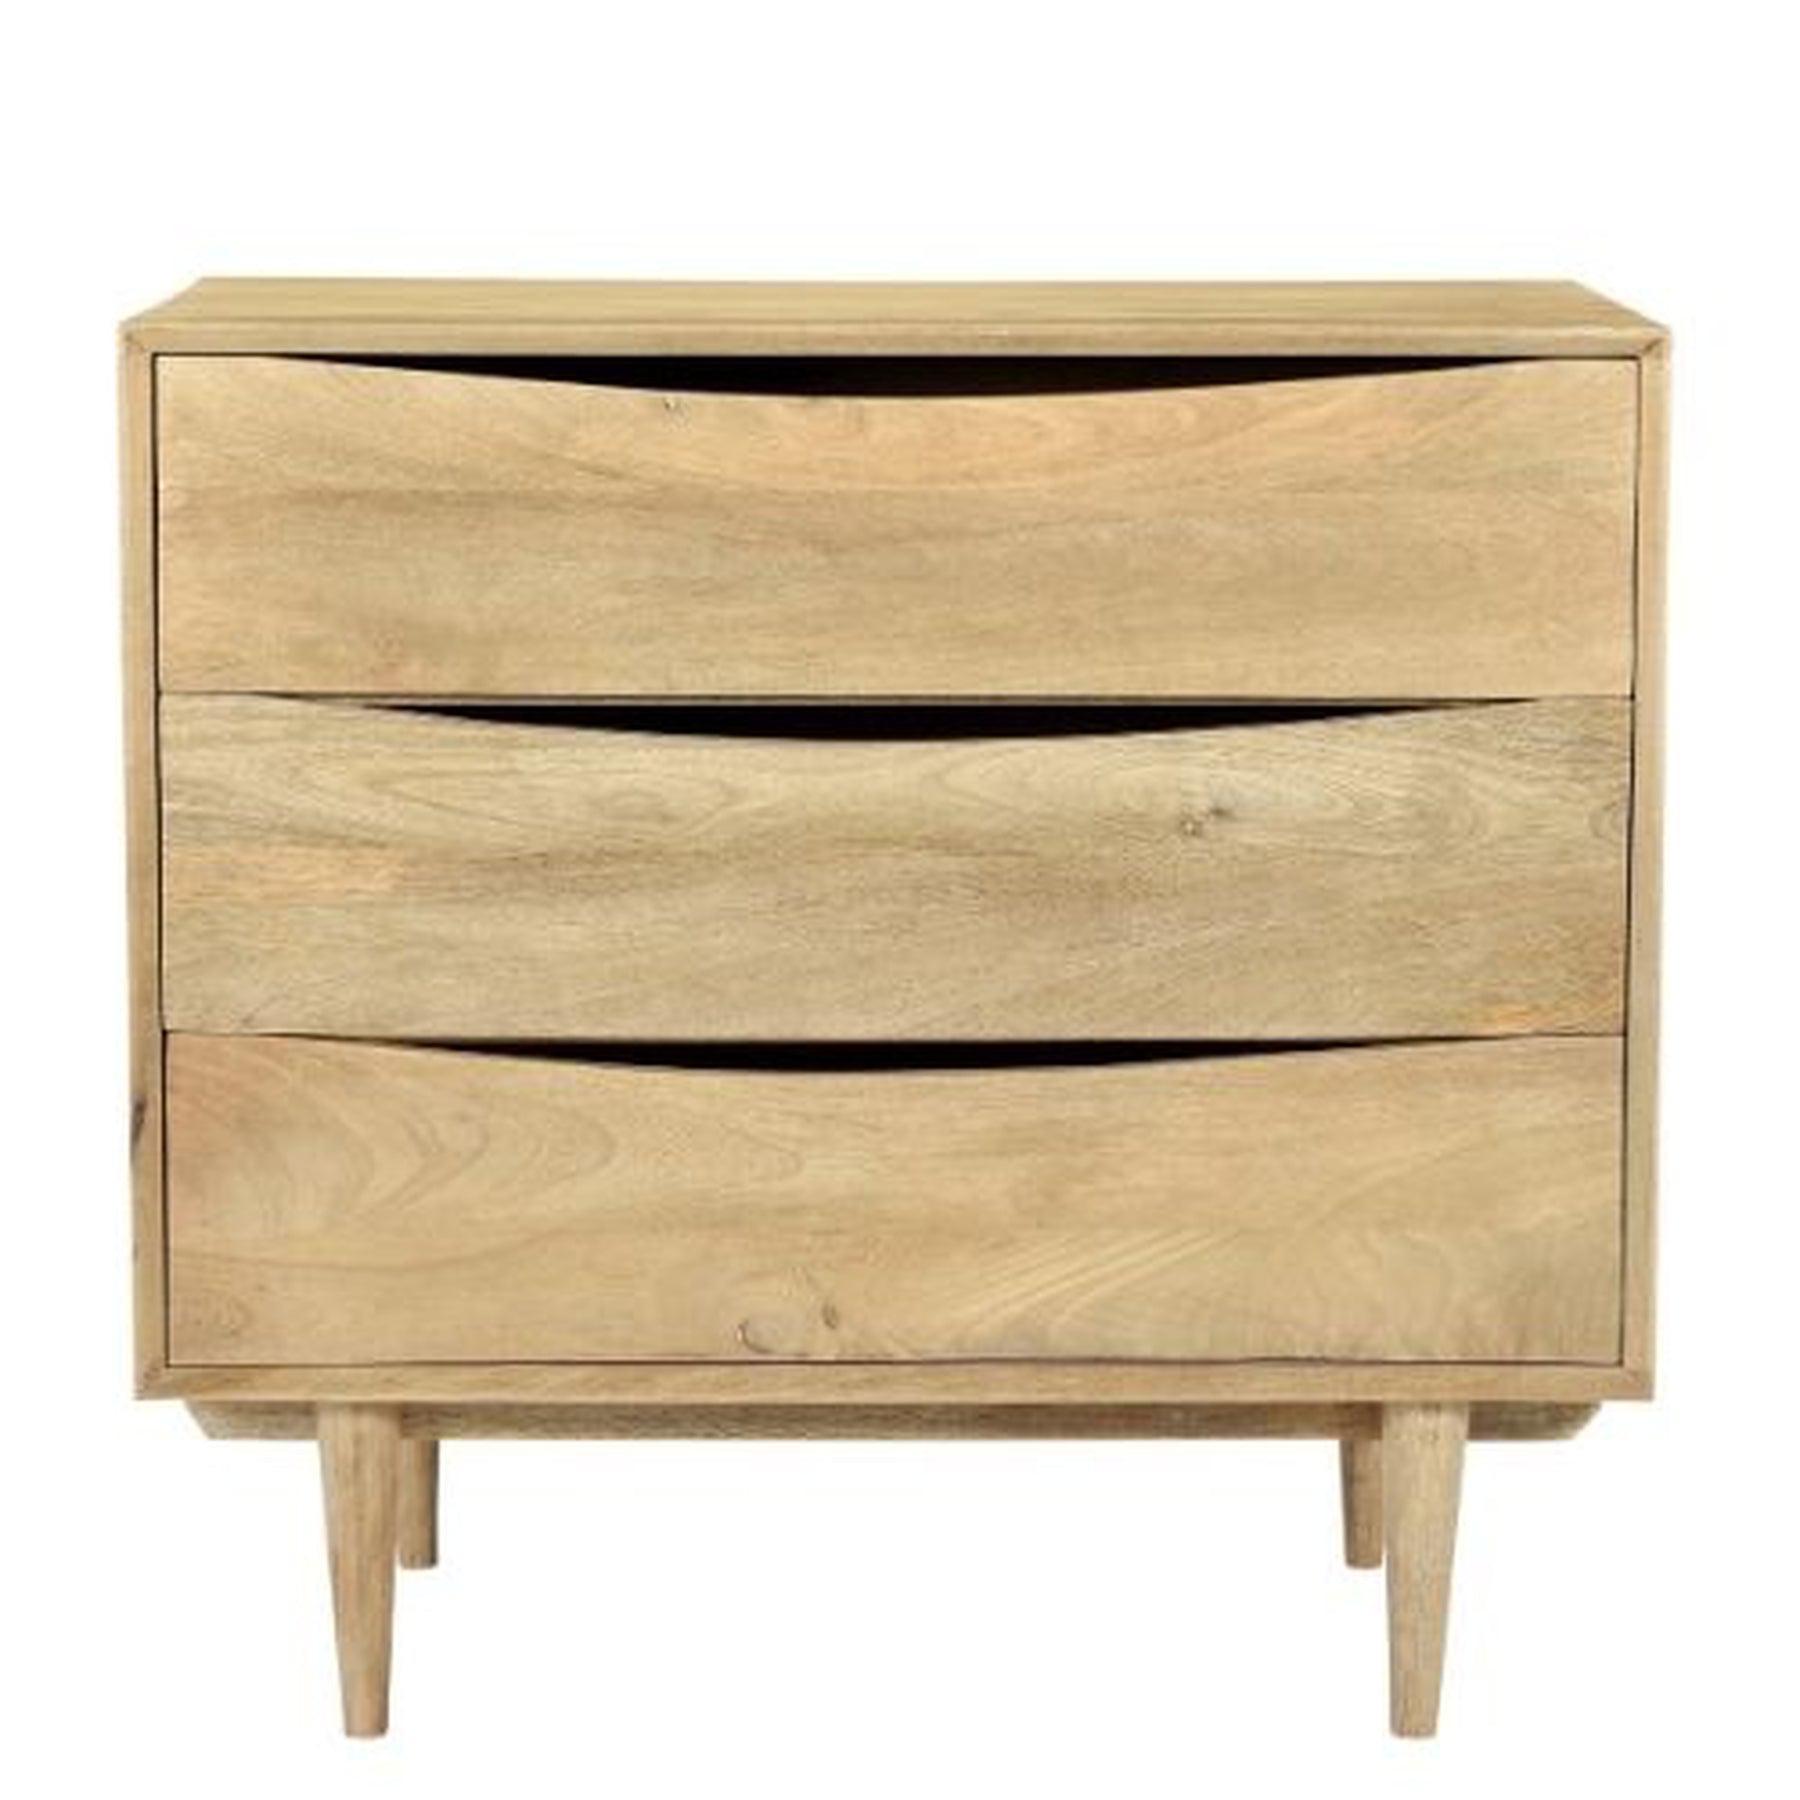 Wooden Retro Sixties 3 Drawer Chest of Drawers | 85x45x80 cm